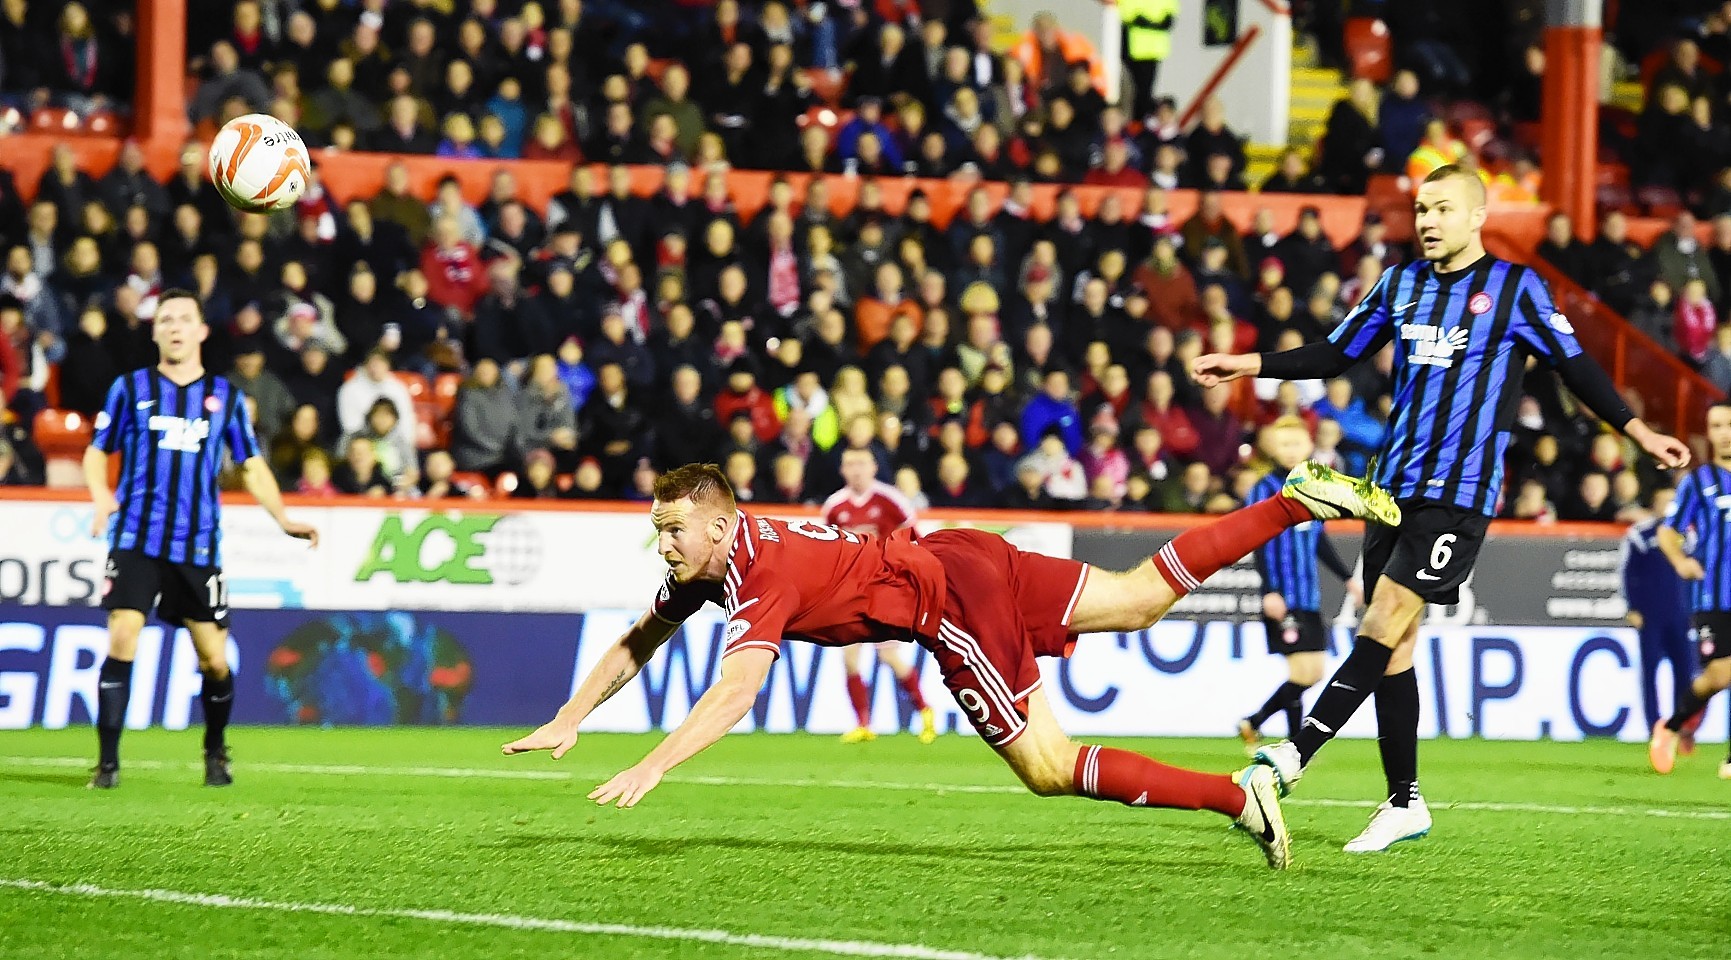 Adam Rooney dives to head home the only goal of the game.